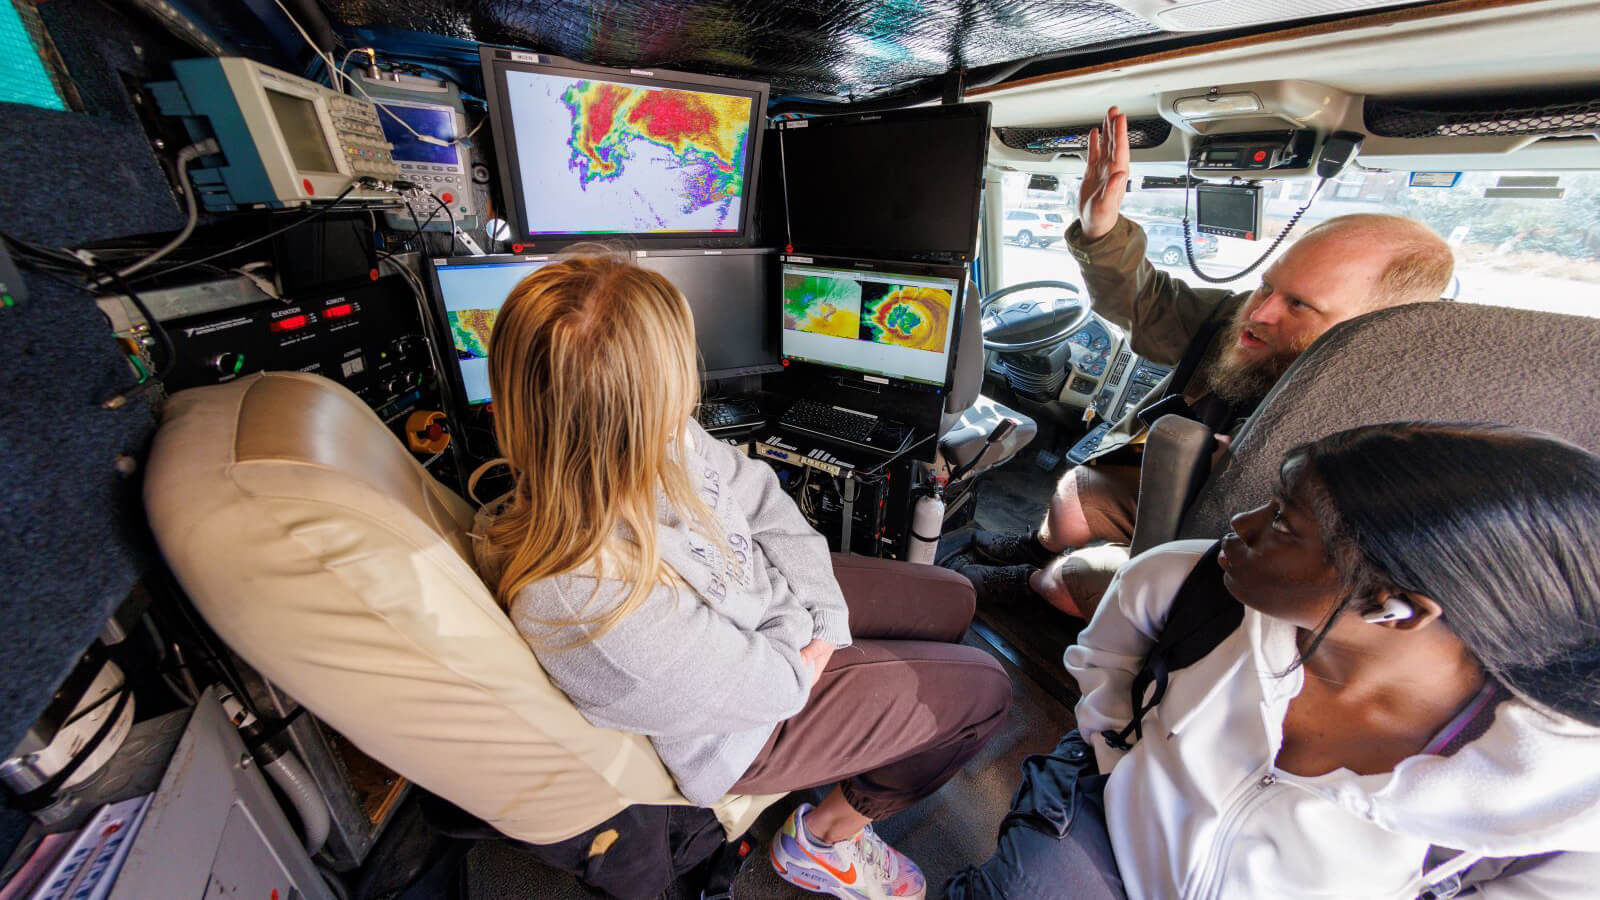 Students sit in storm chasing vehicle looking at screen filled with data with man explaining.